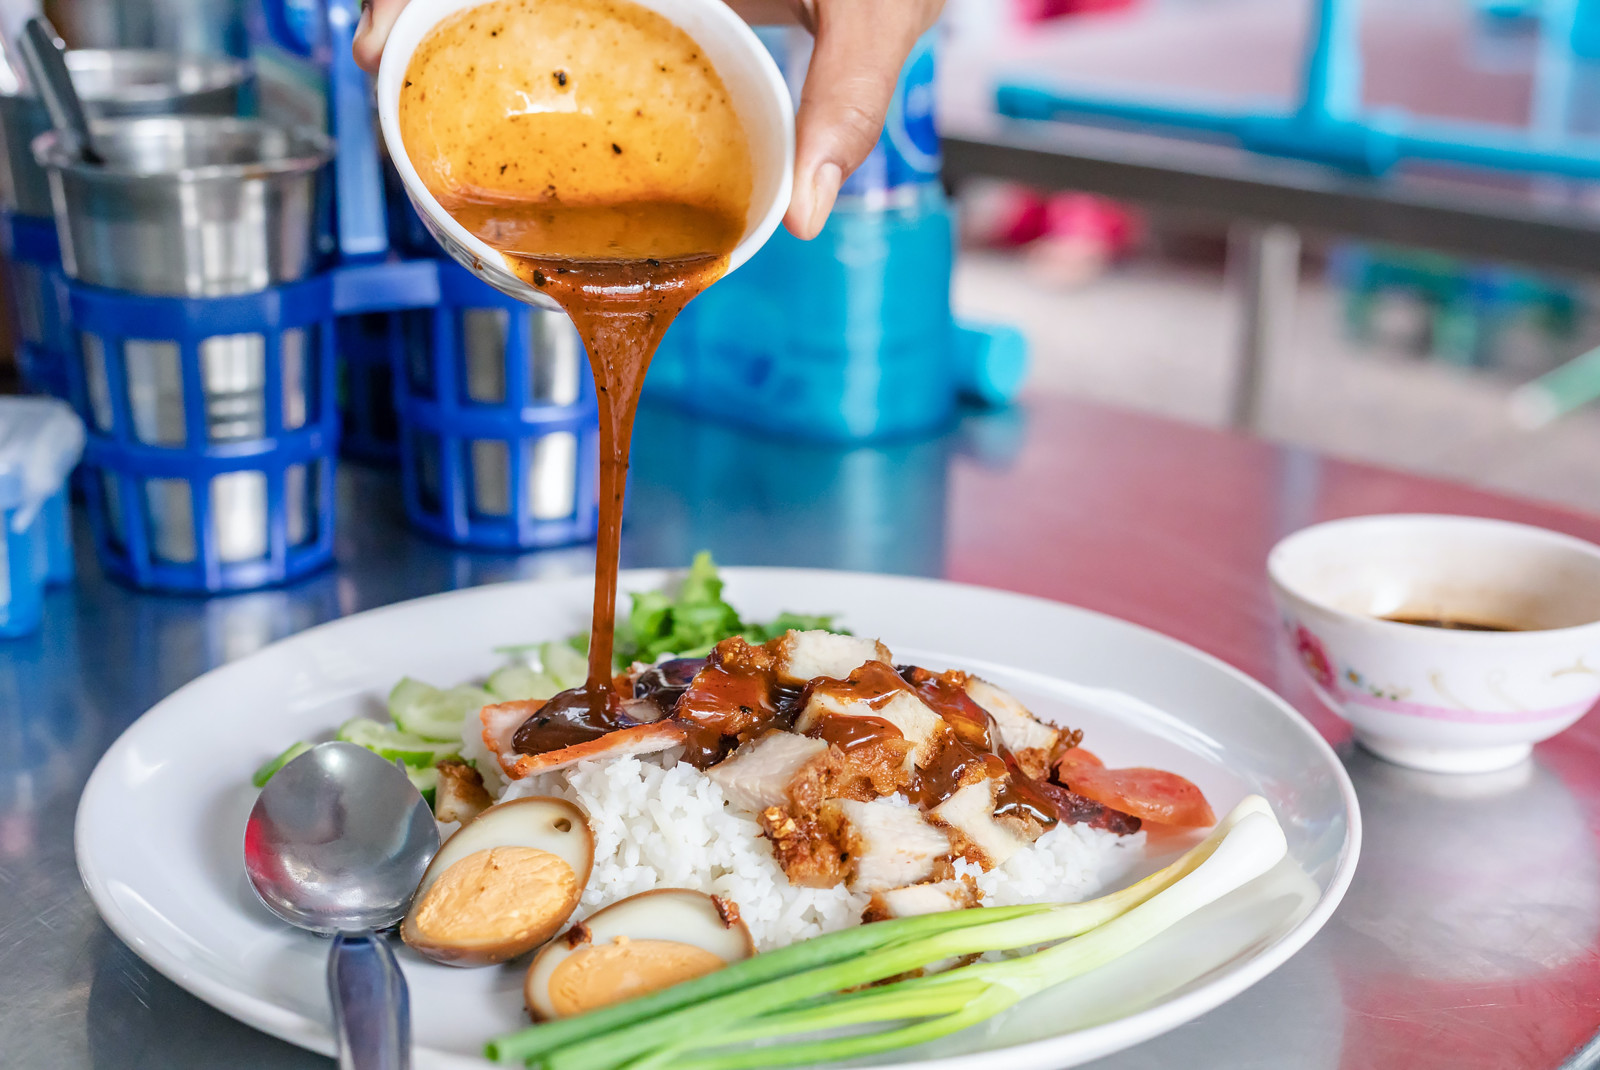 Red sauce being poured over chicken and rice with a hard boiled egg and a green spring onion on a plate with a metal spoon and cups with silverware in blue plastic holders and a white bowl with sauce on the side